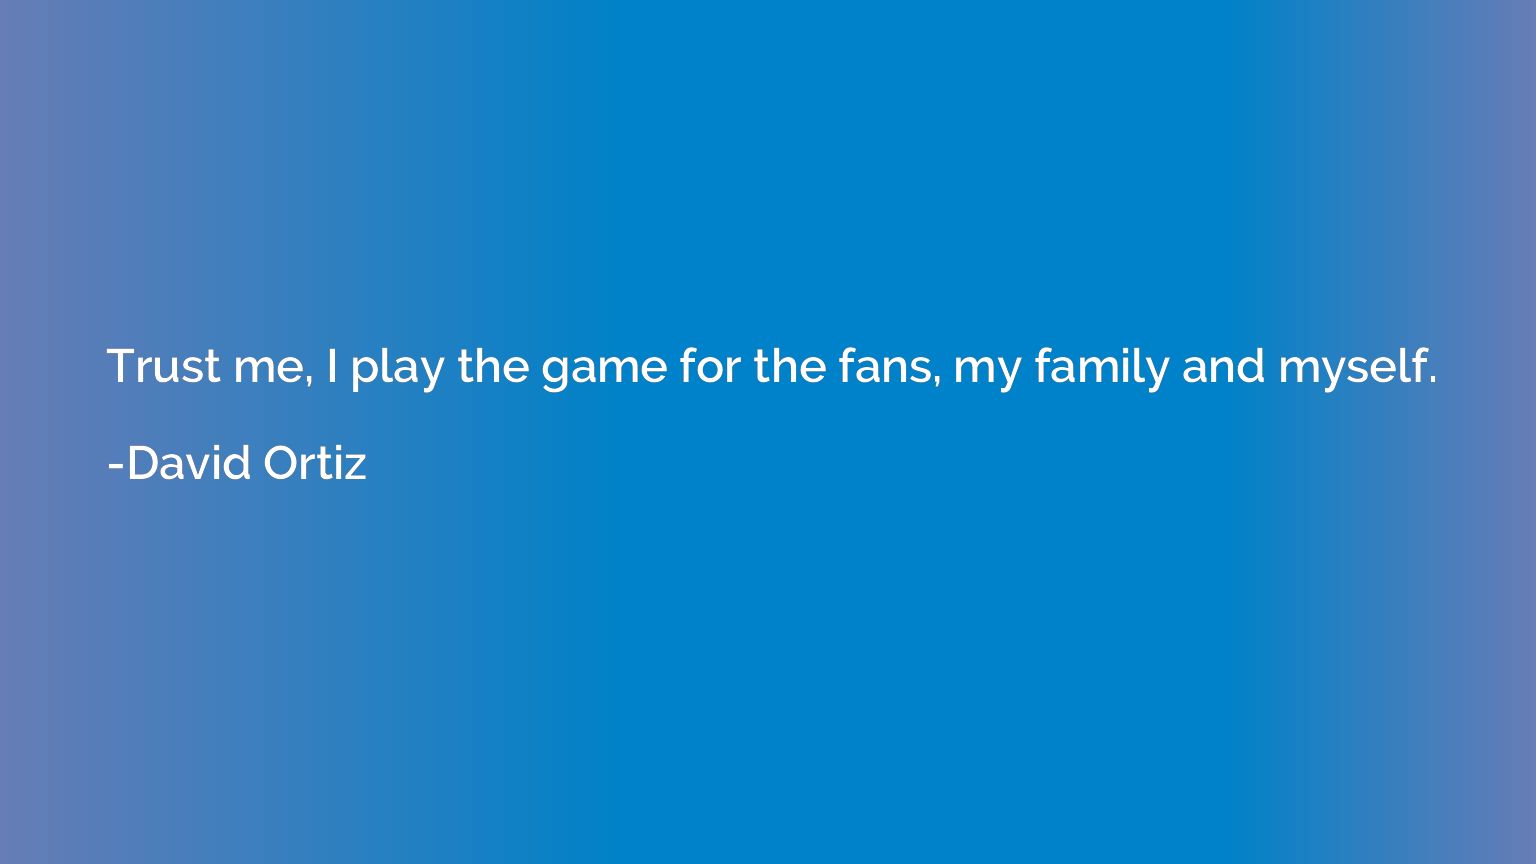 Trust me, I play the game for the fans, my family and myself